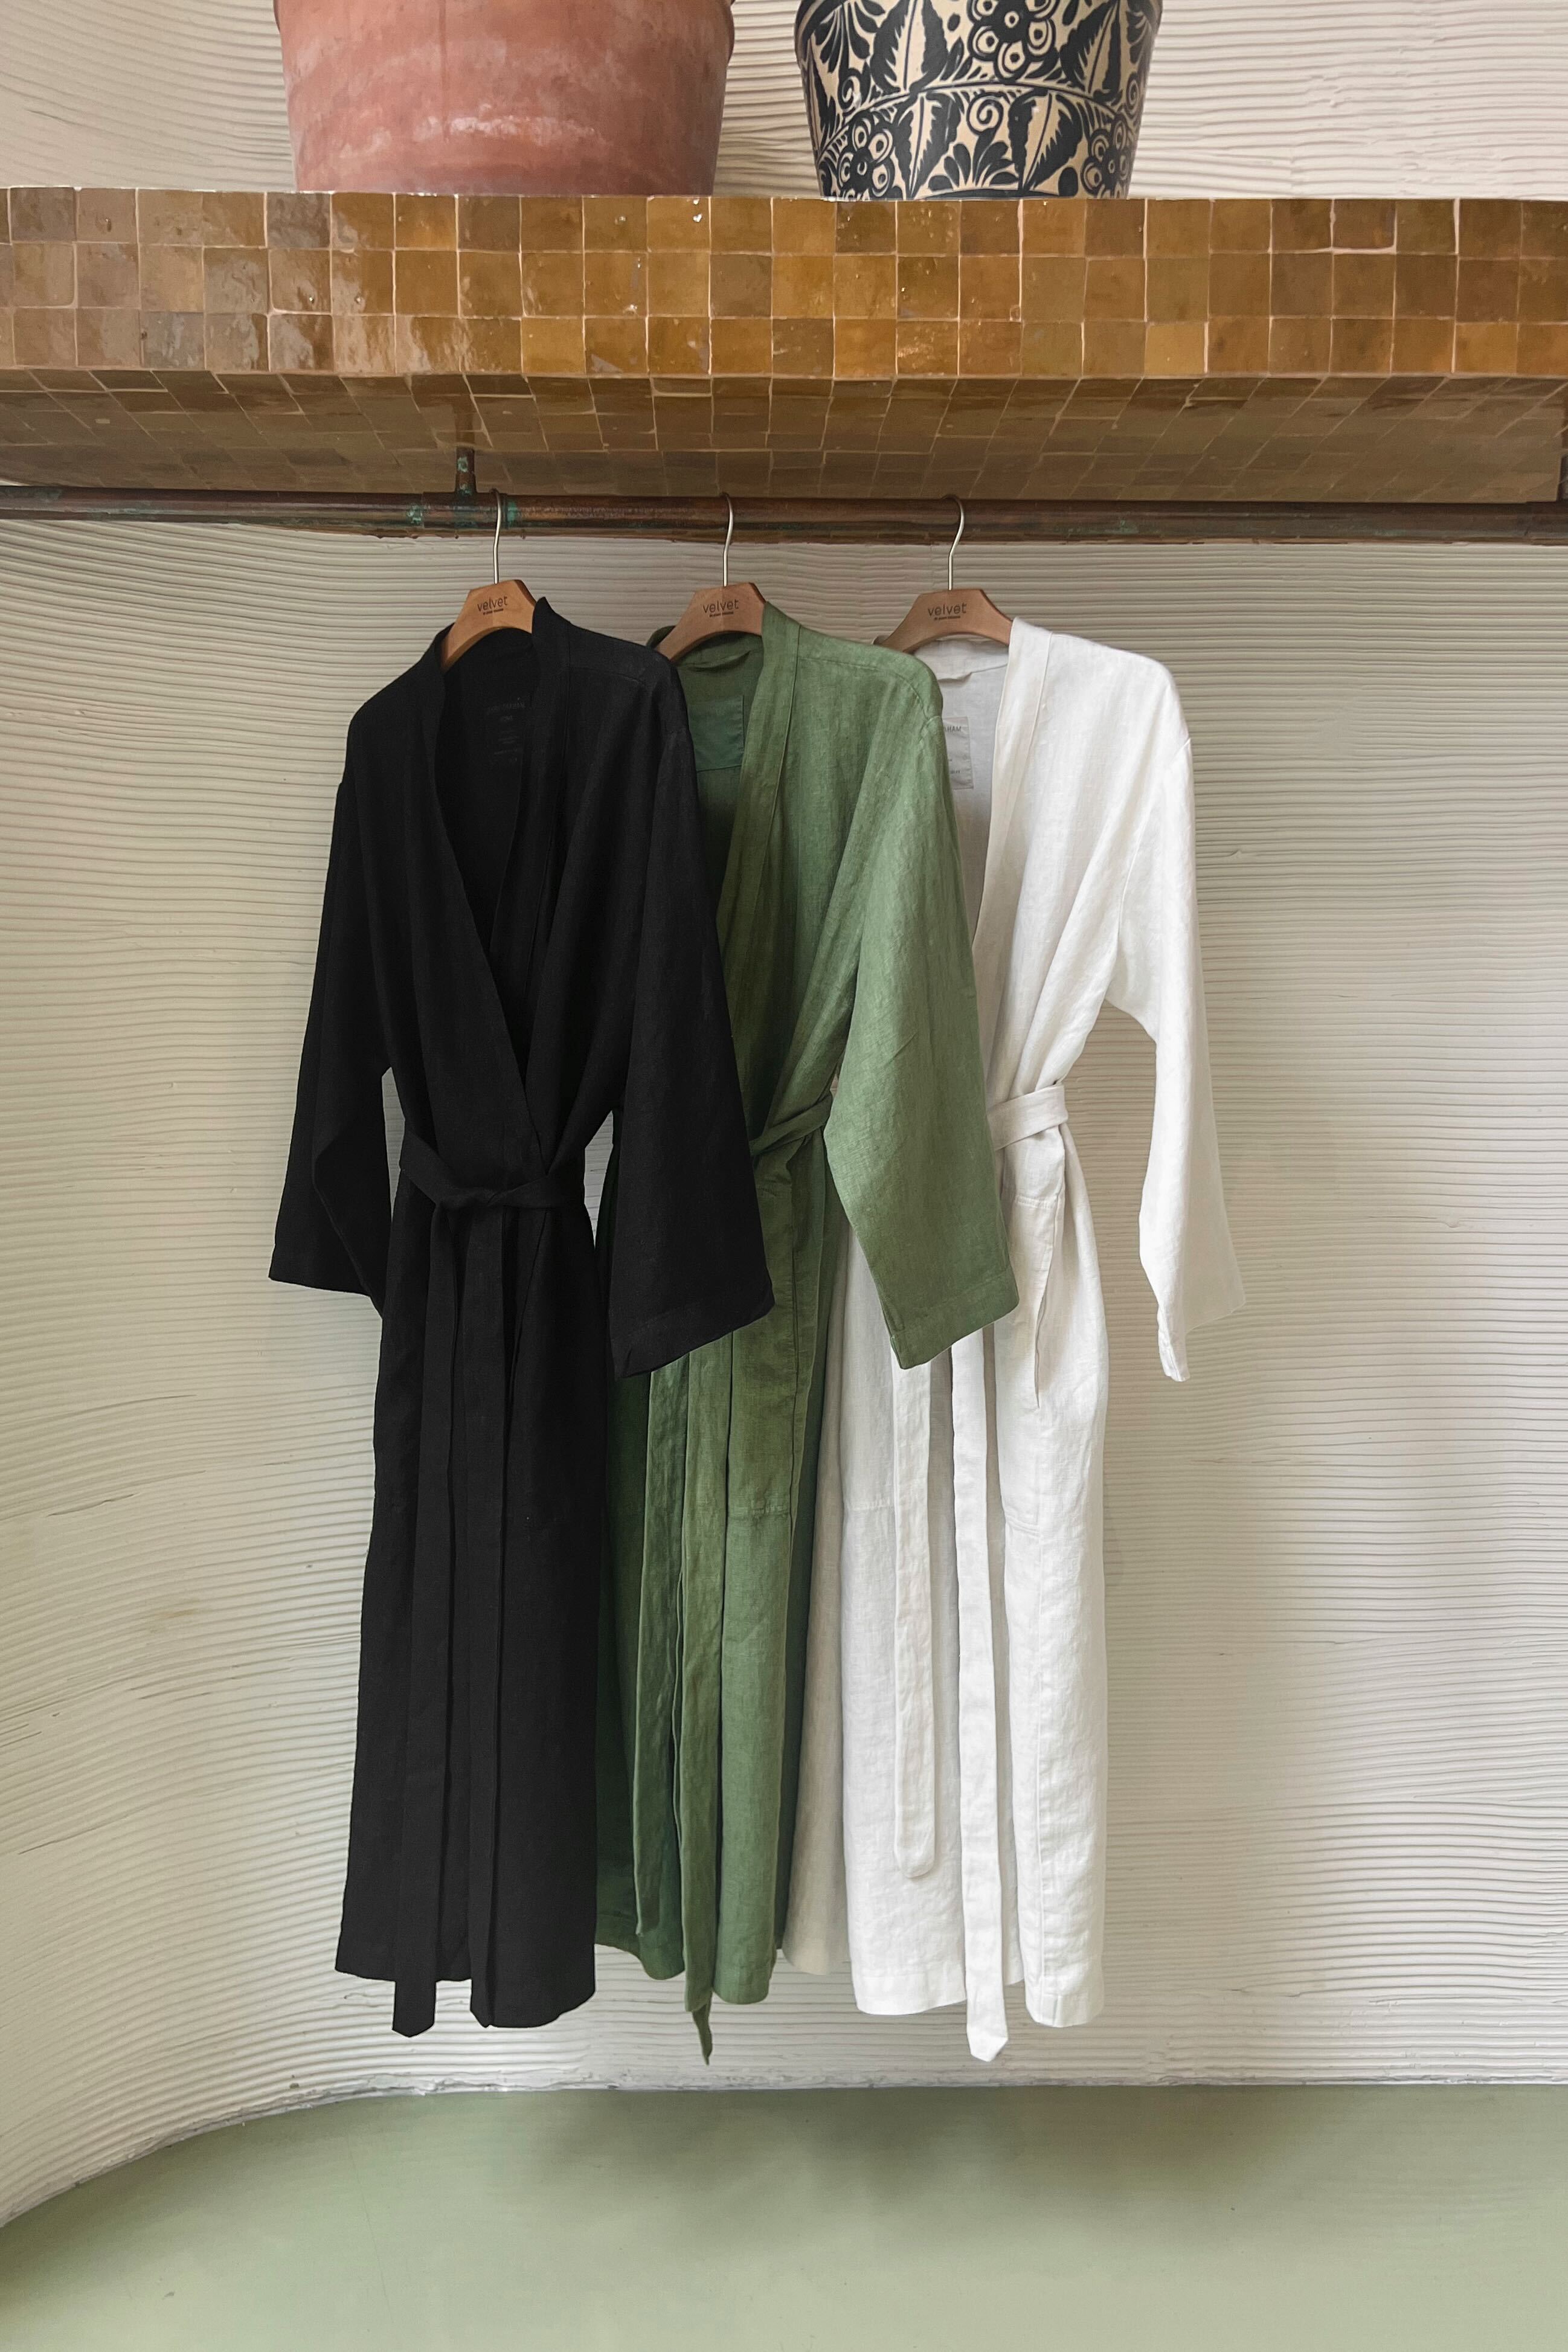   Jenny Graham Linen Robe in black on hanger near textured wall with robe in basil and beach 